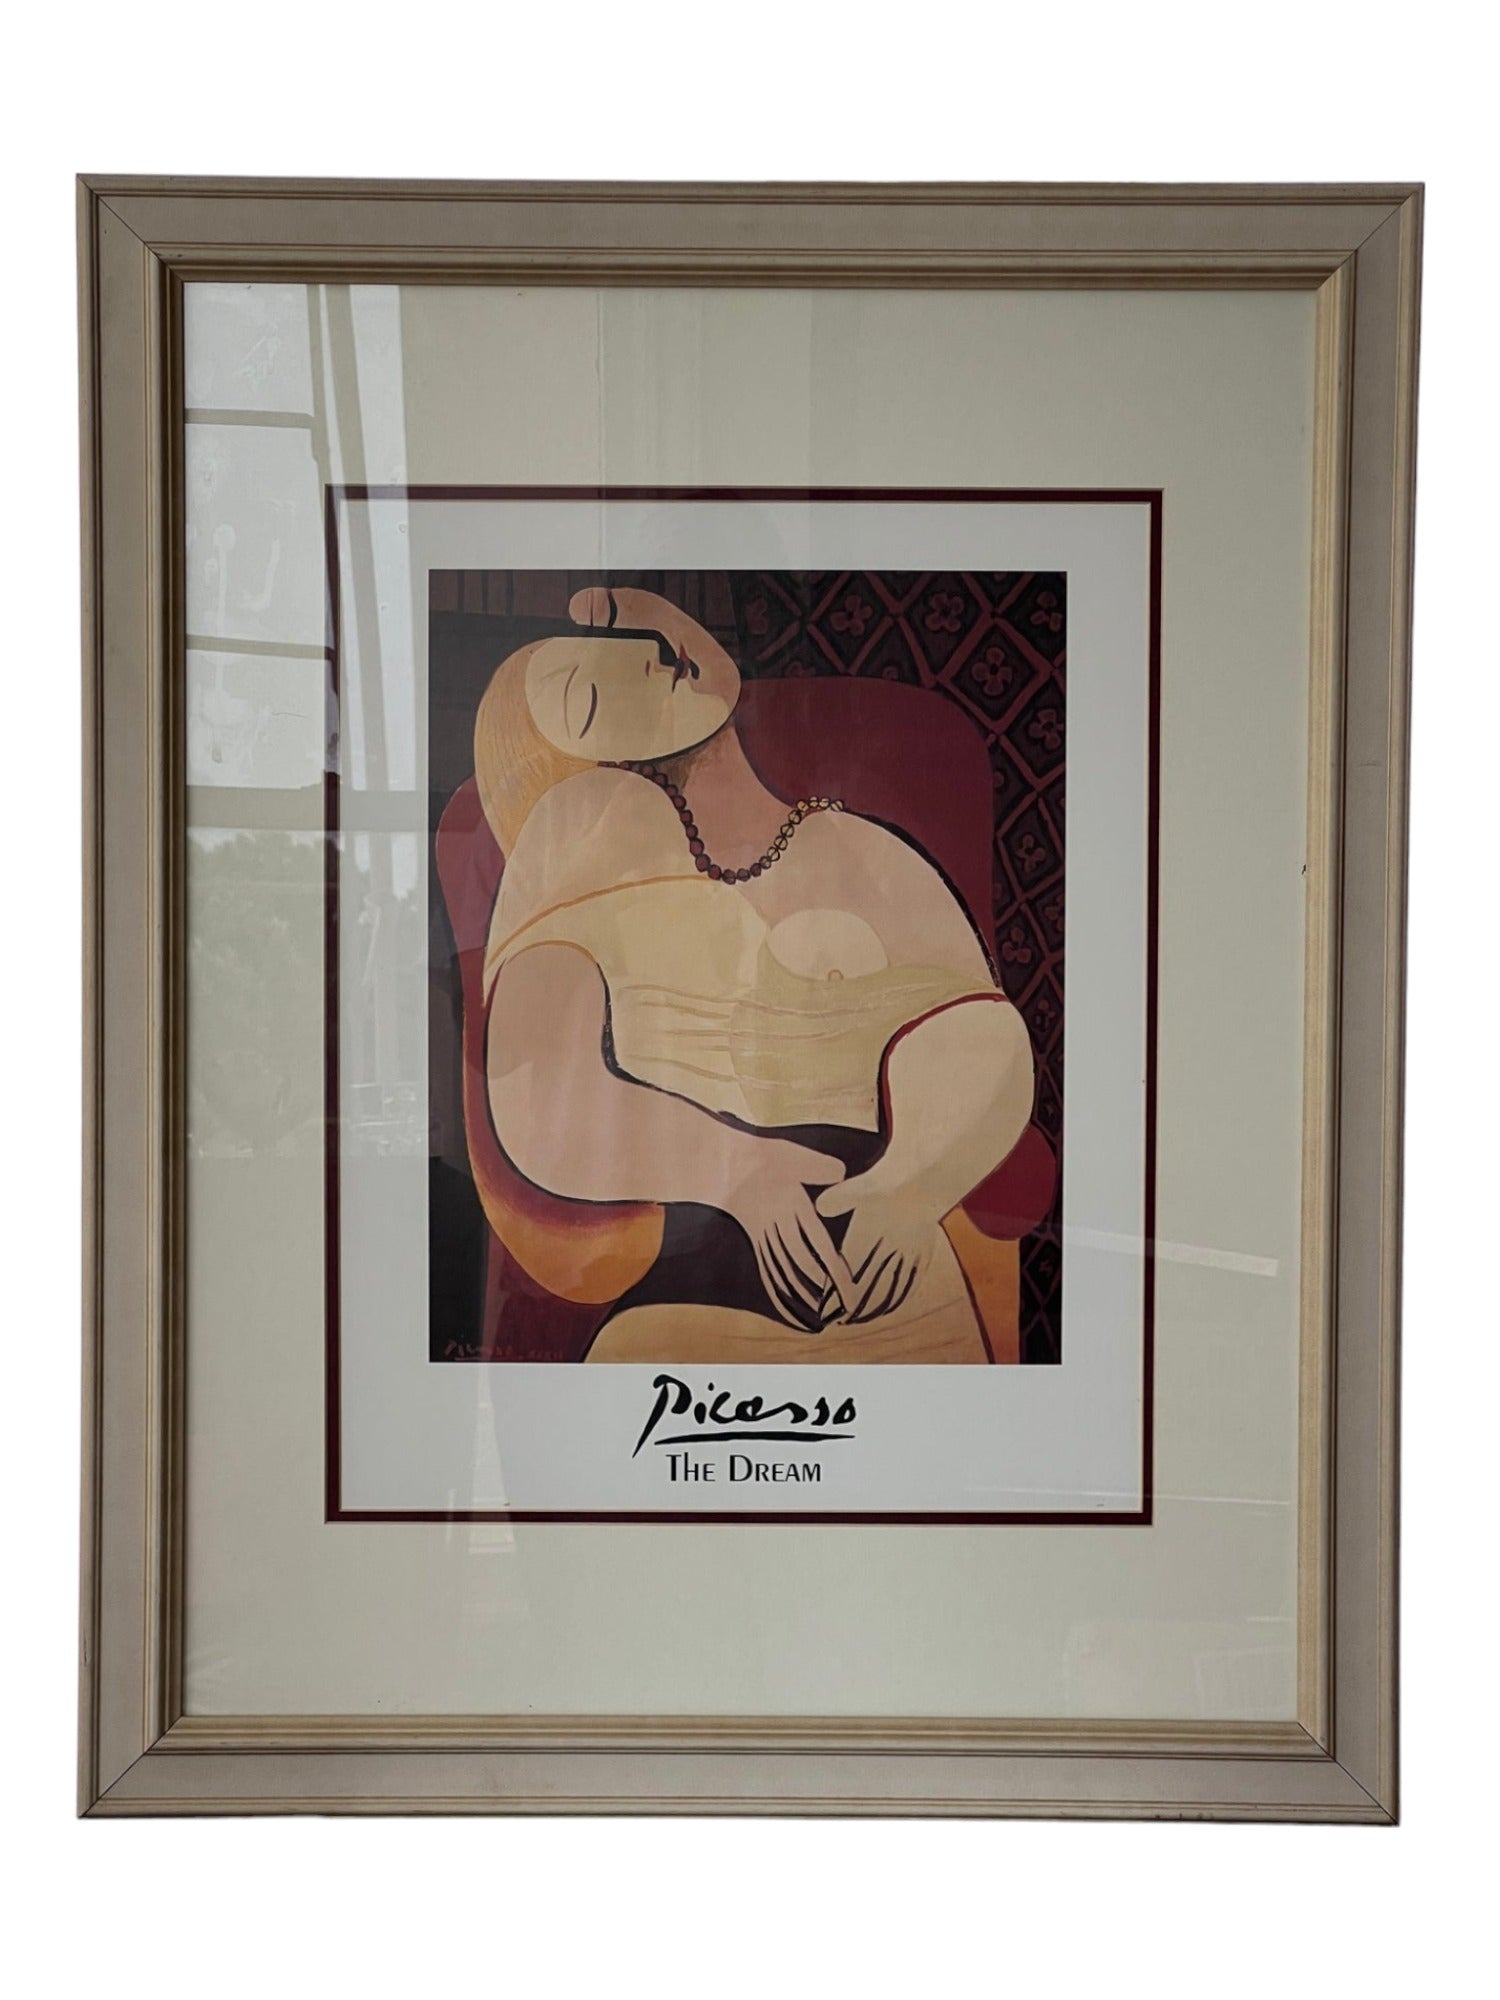 "The Dream" by Picasso, 1932 Framed Print